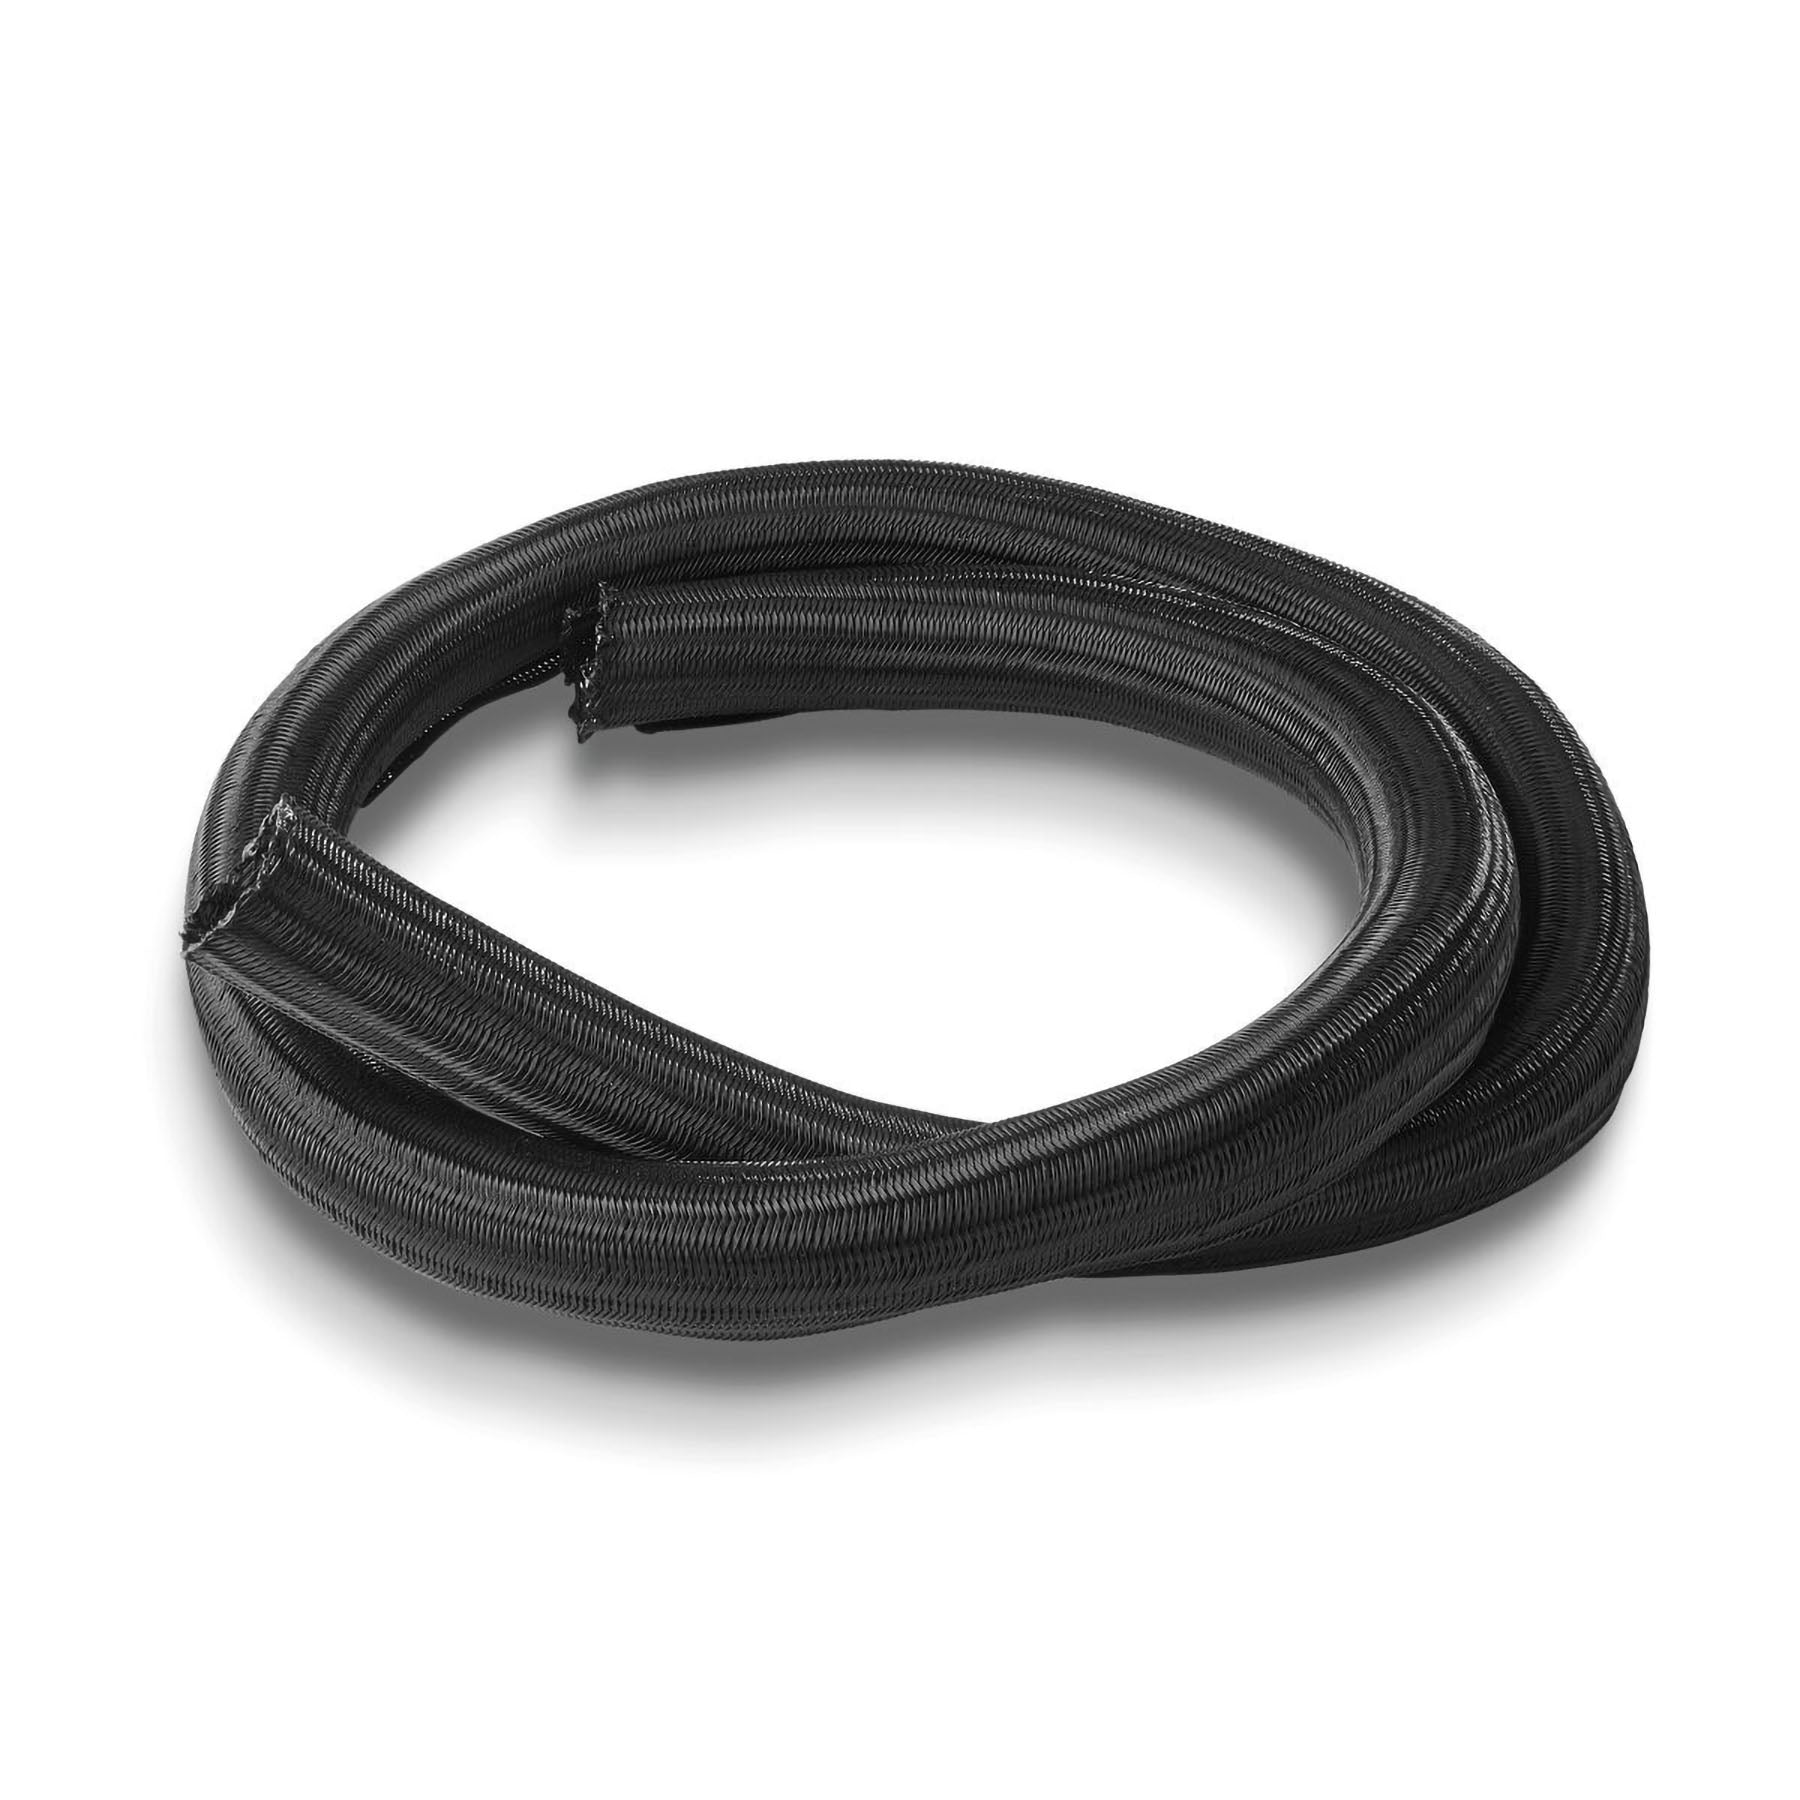 Vogel's TVA 6202 Cable Sleeve